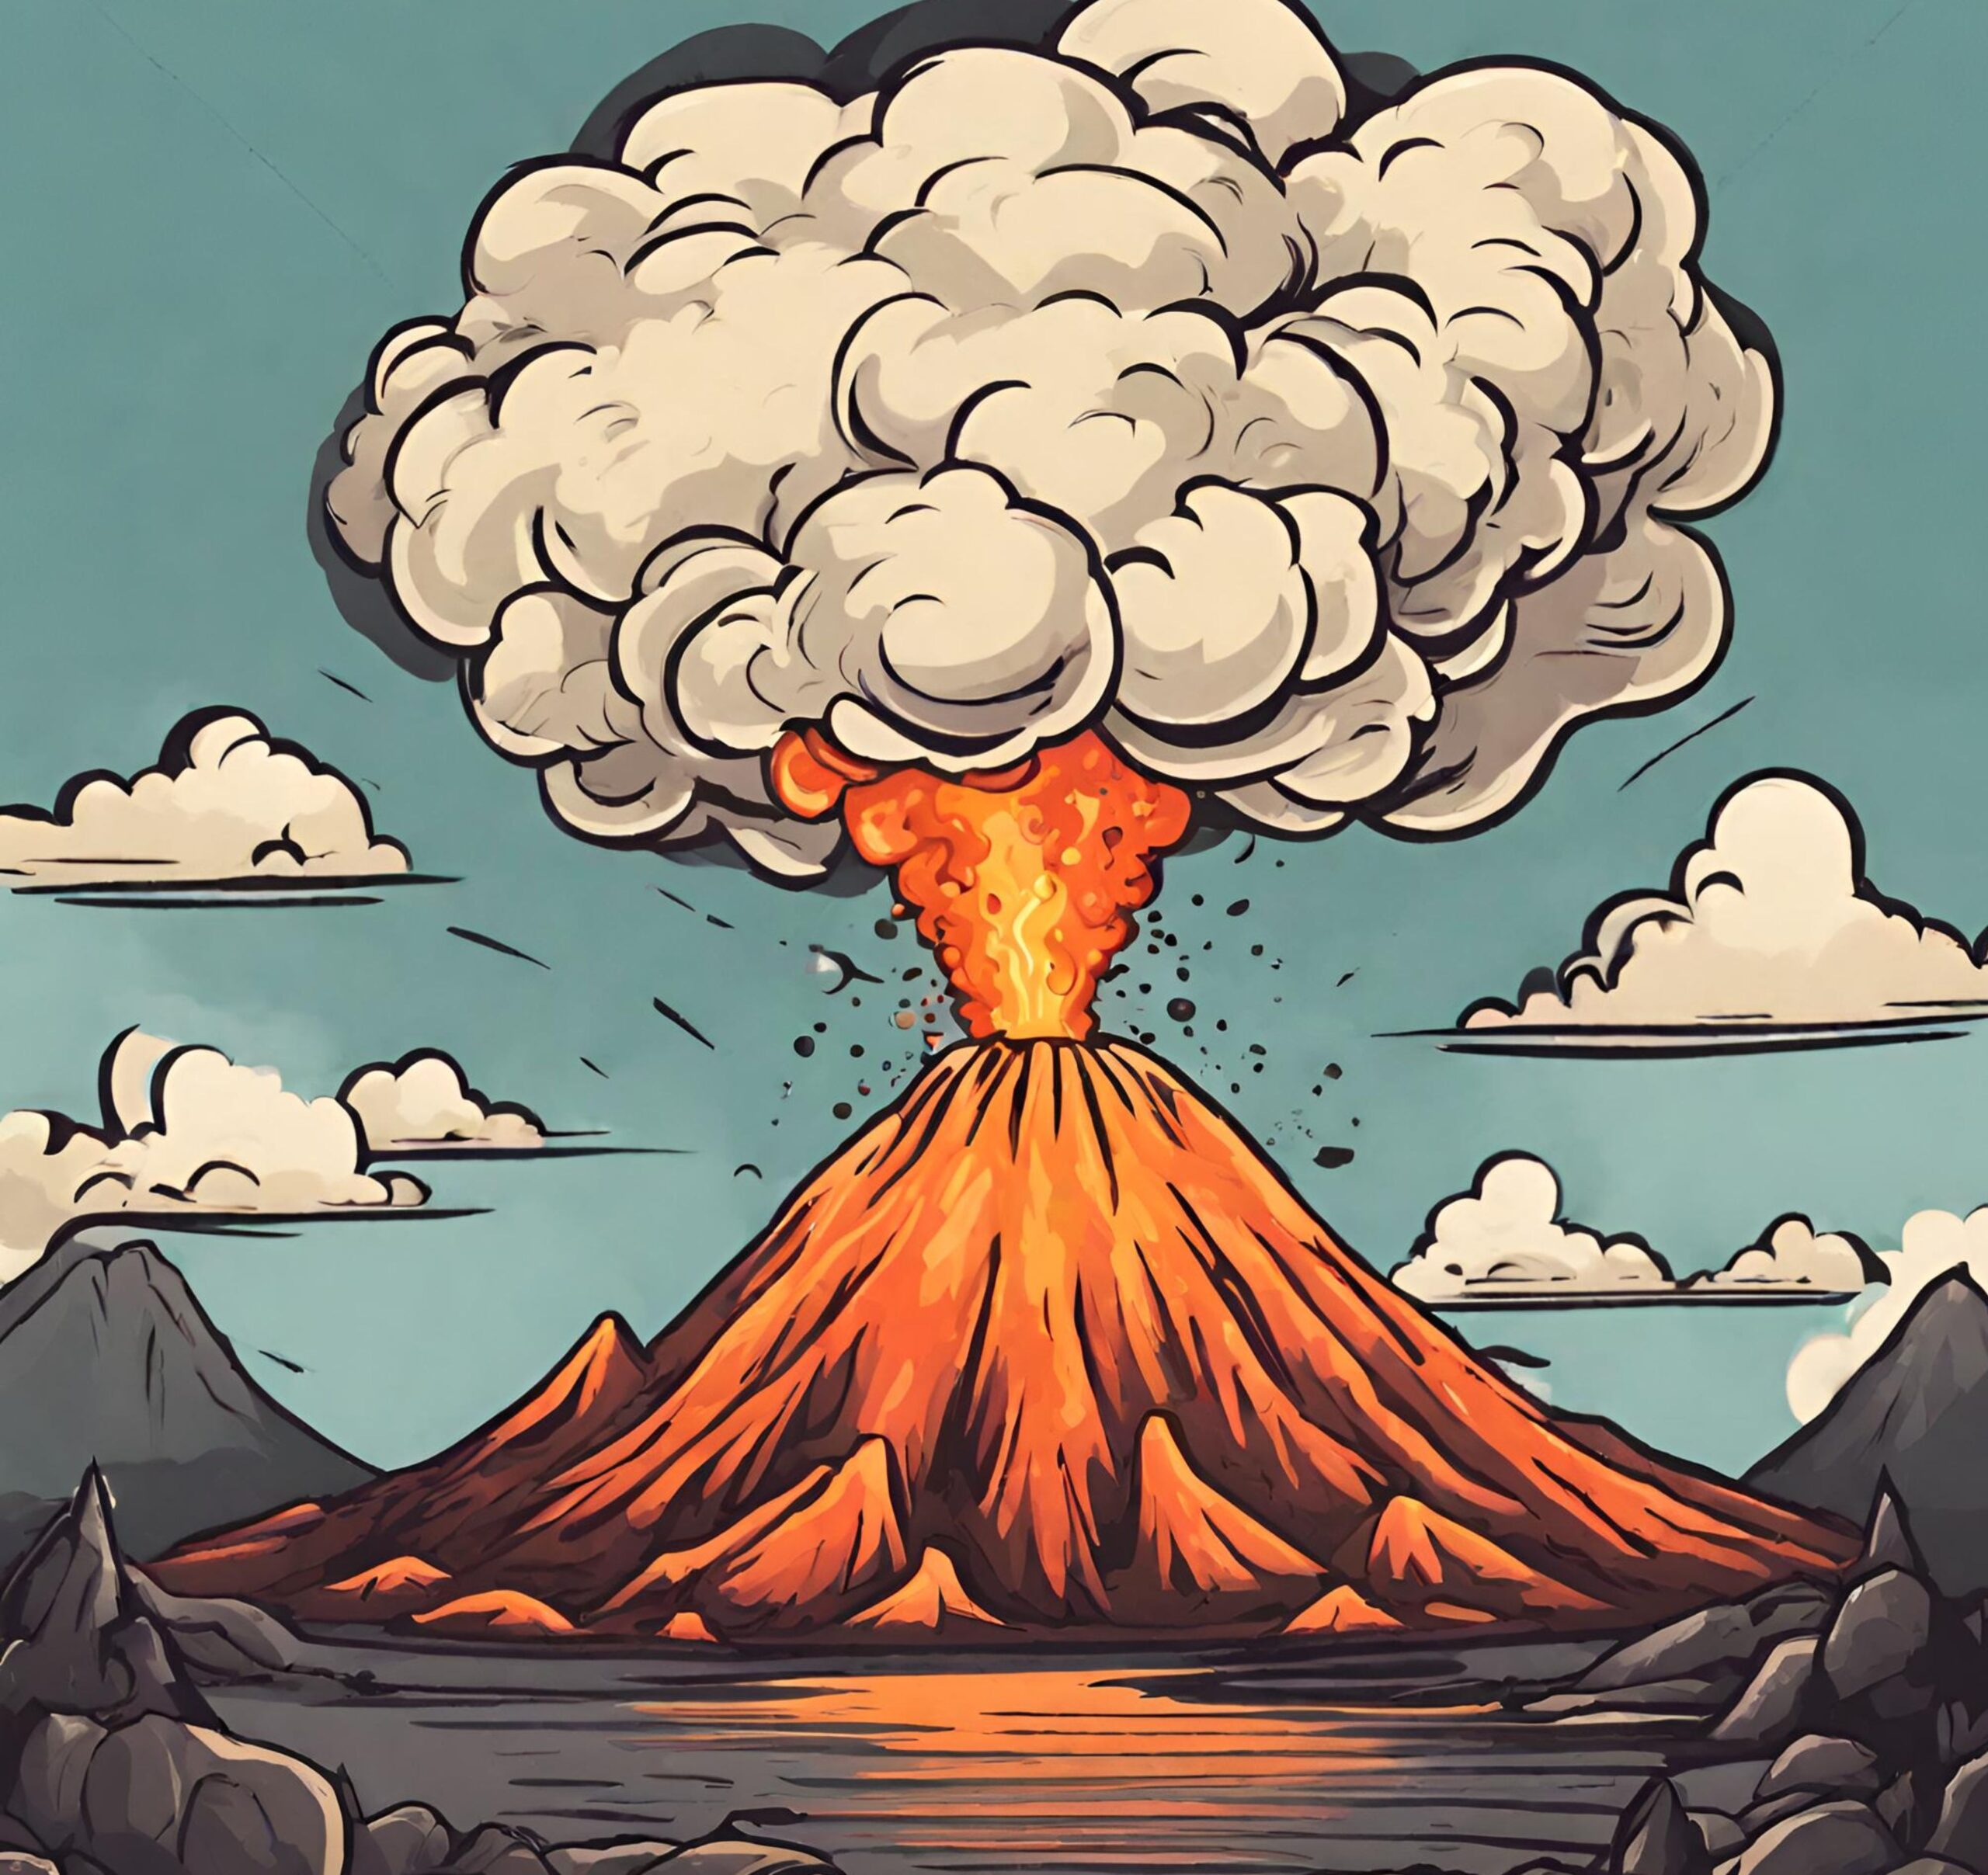 How to make your very own volcano!